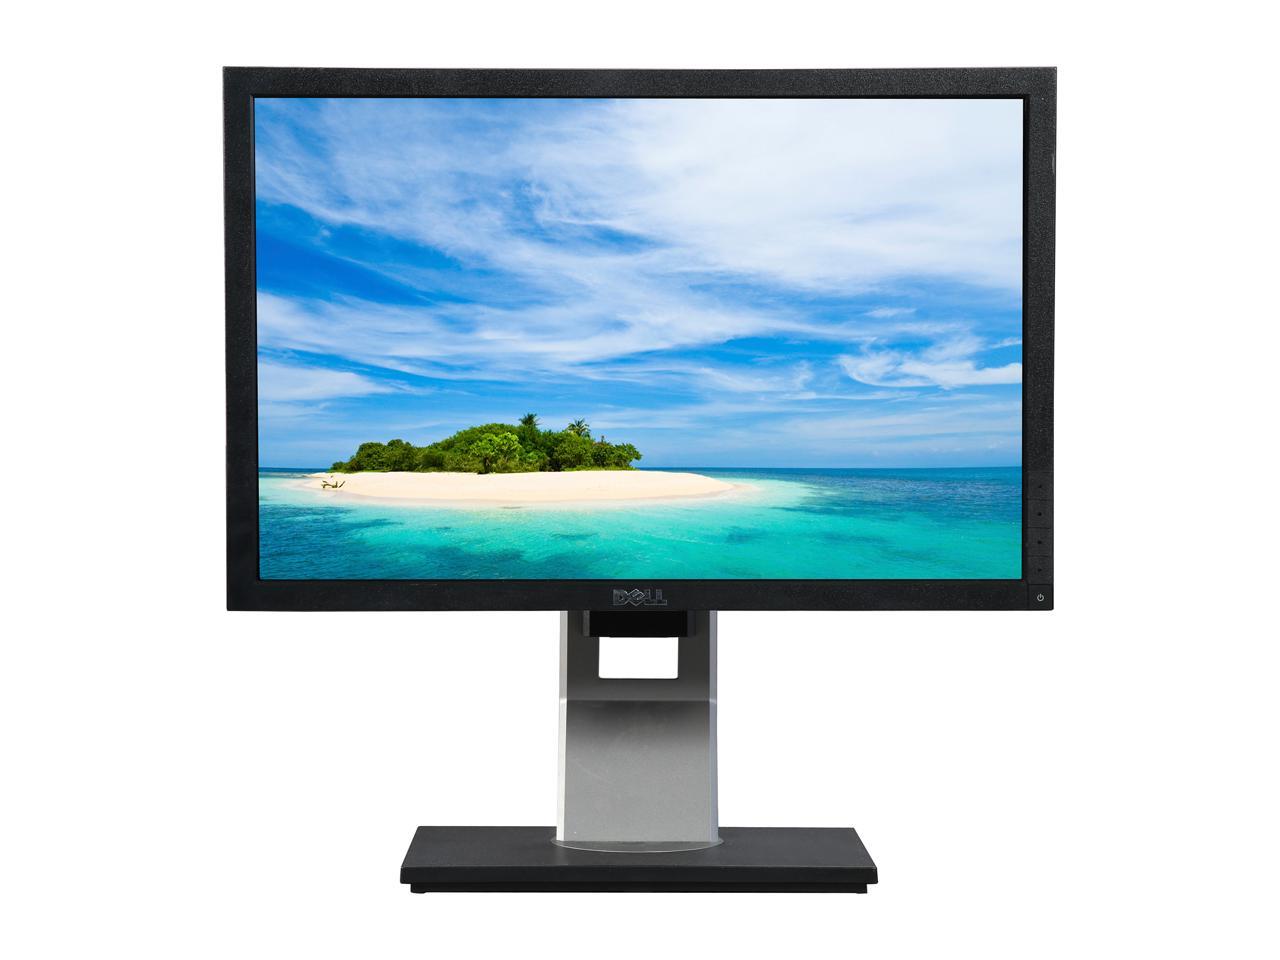 Dell Professional P1911 19" WideScreen LCD Monitor 1440 x 900 Resolution - Refurbished